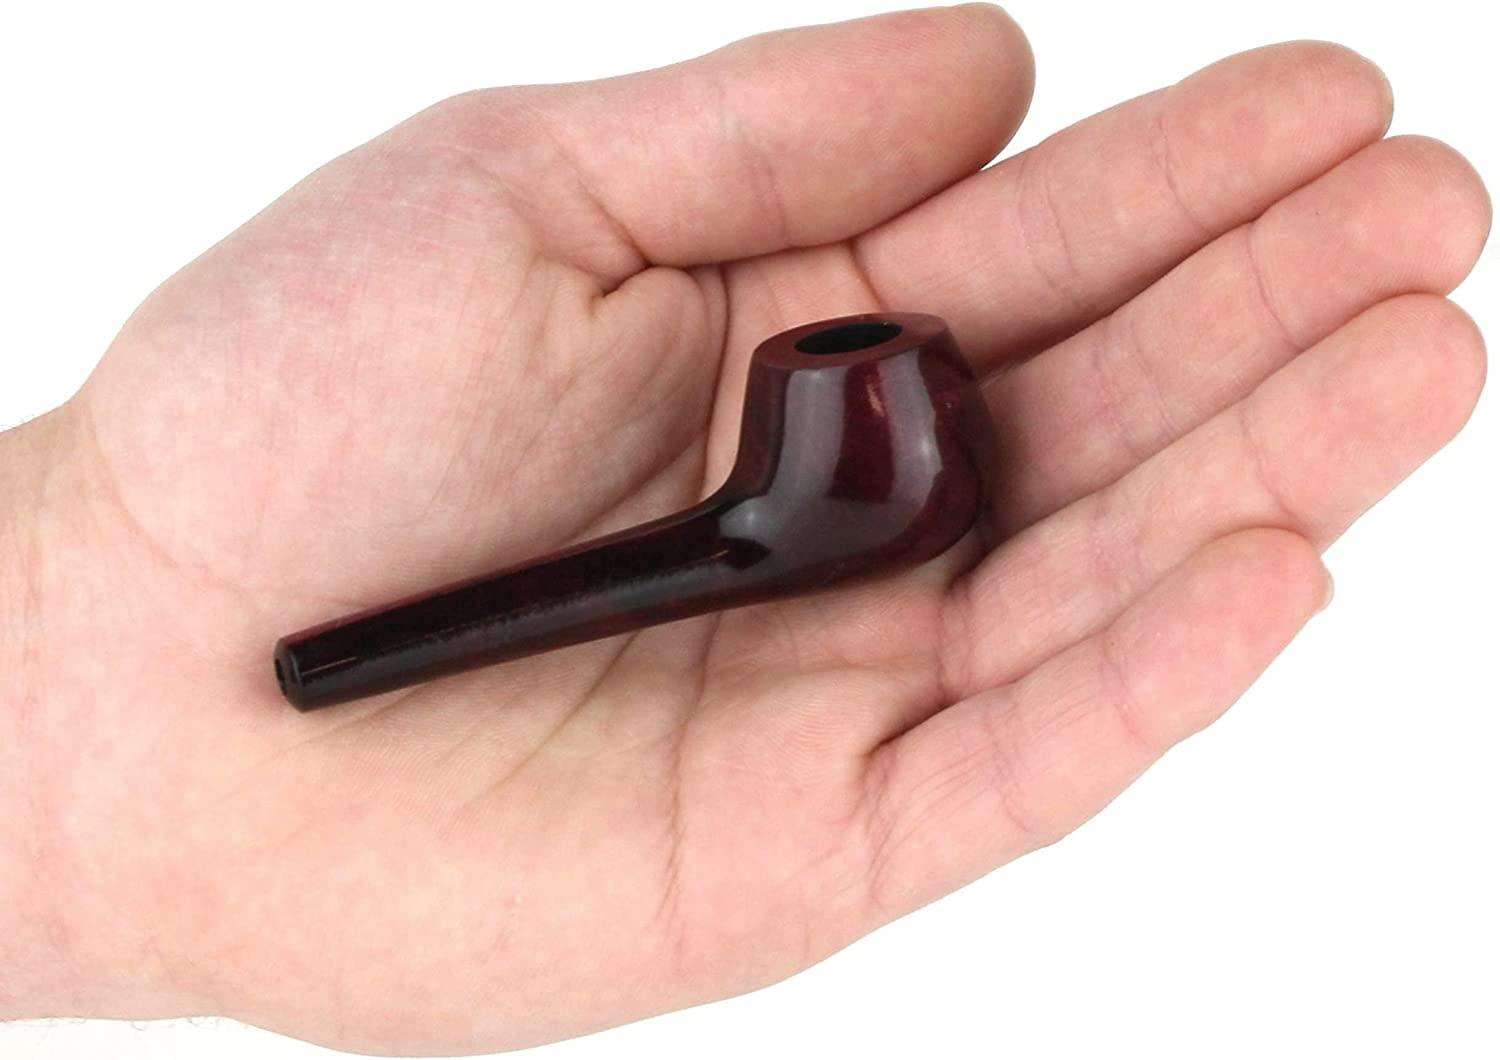 Handmade Tobacco Smoking Mini Pipe Pear Wood Roots for Smoke Wooden Bowl - Puffingmaster